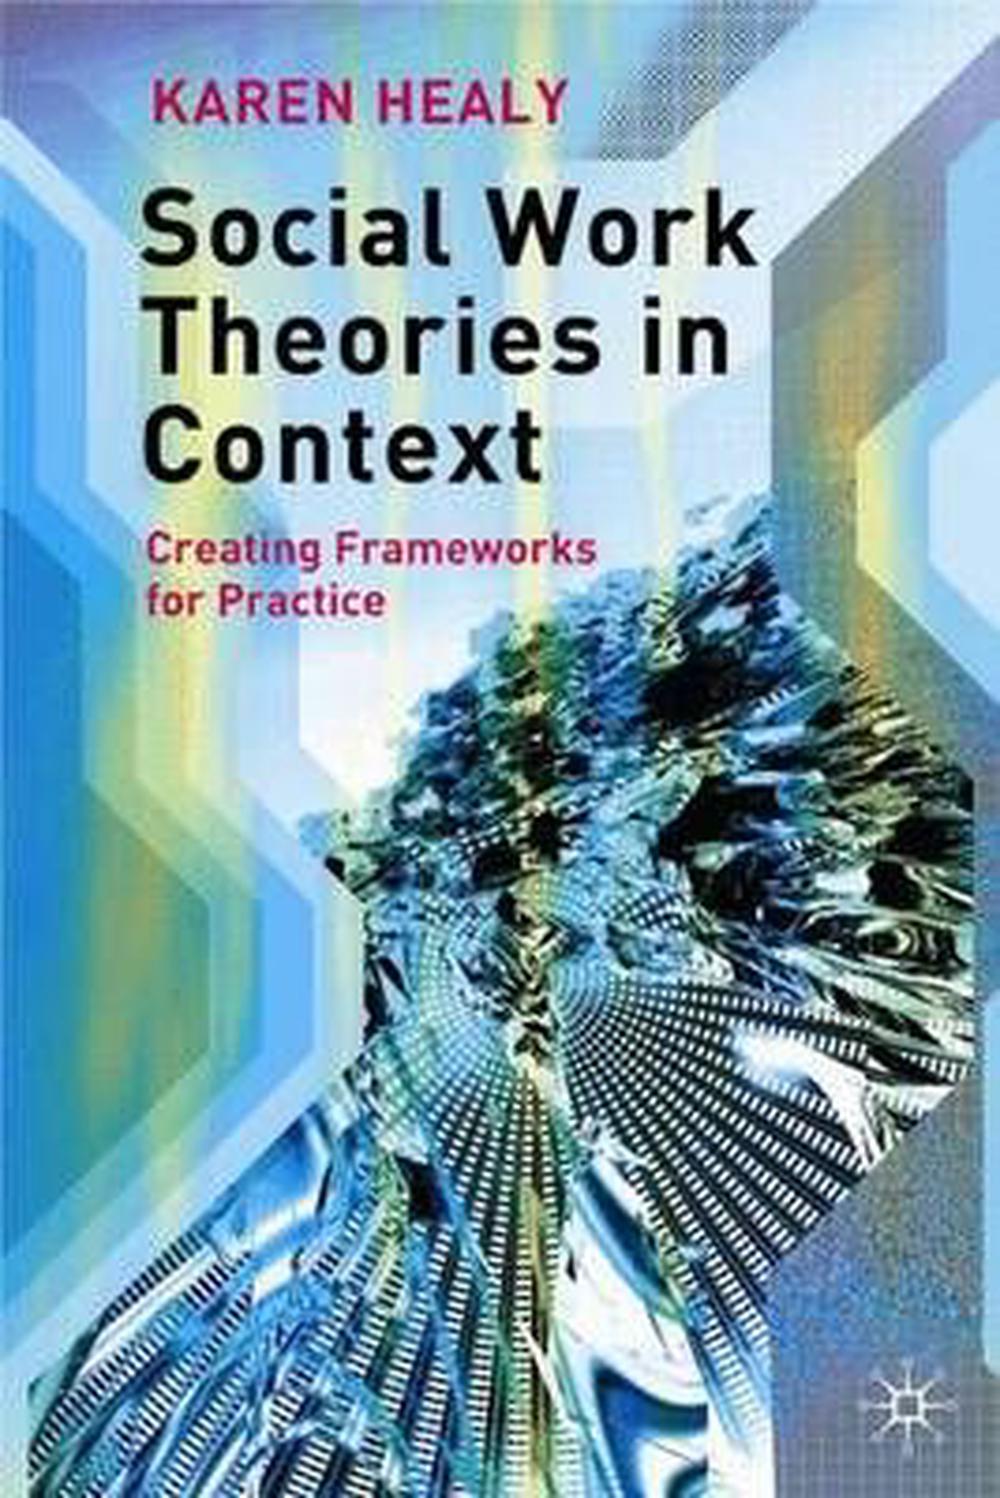 Social Work Theories in Context Creating Frameworks for Practice by Karen Healy, Paperback